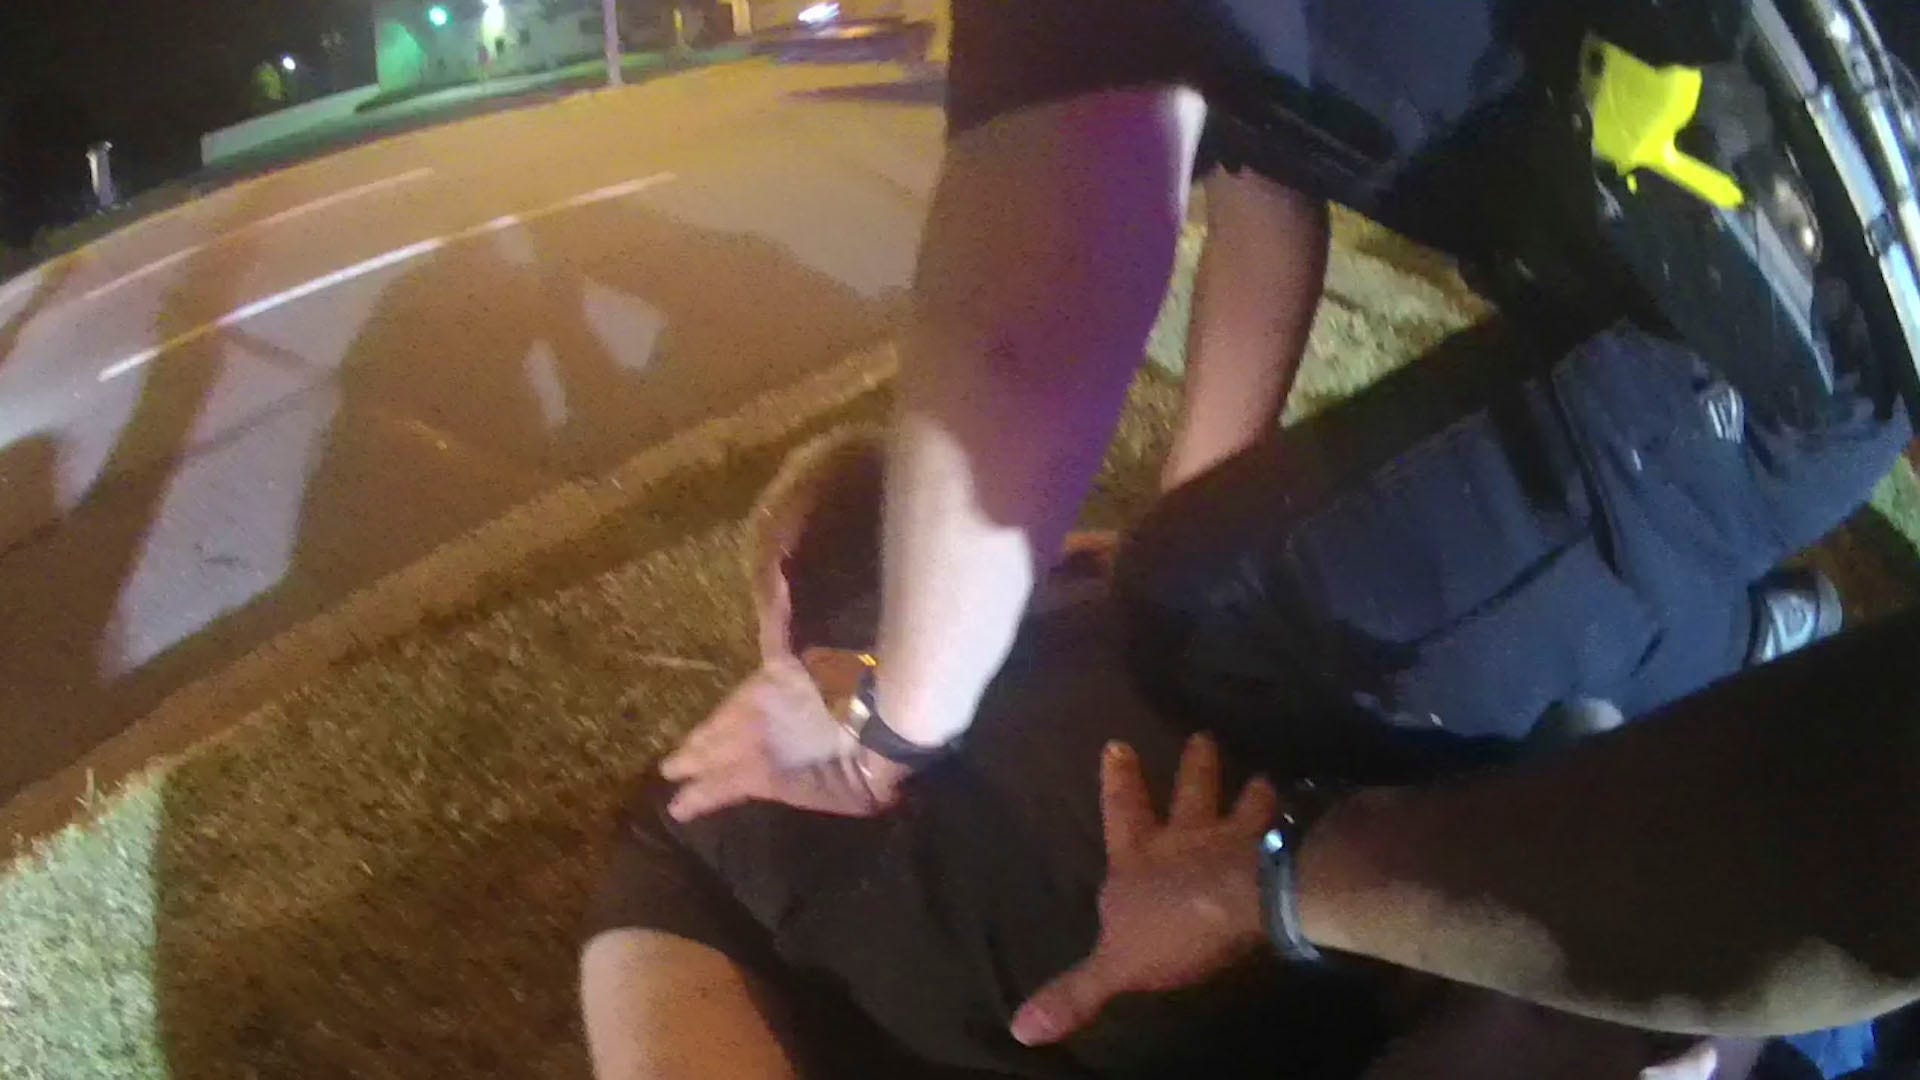 Dallas Police Department body camera footage shows officers pinning Tony Timpa to the ground after he called 911 and told dispatchers he had been off medication and had taken cocaine on Aug. 10, 2016. Timpa quit breathing while being restrained and later died.